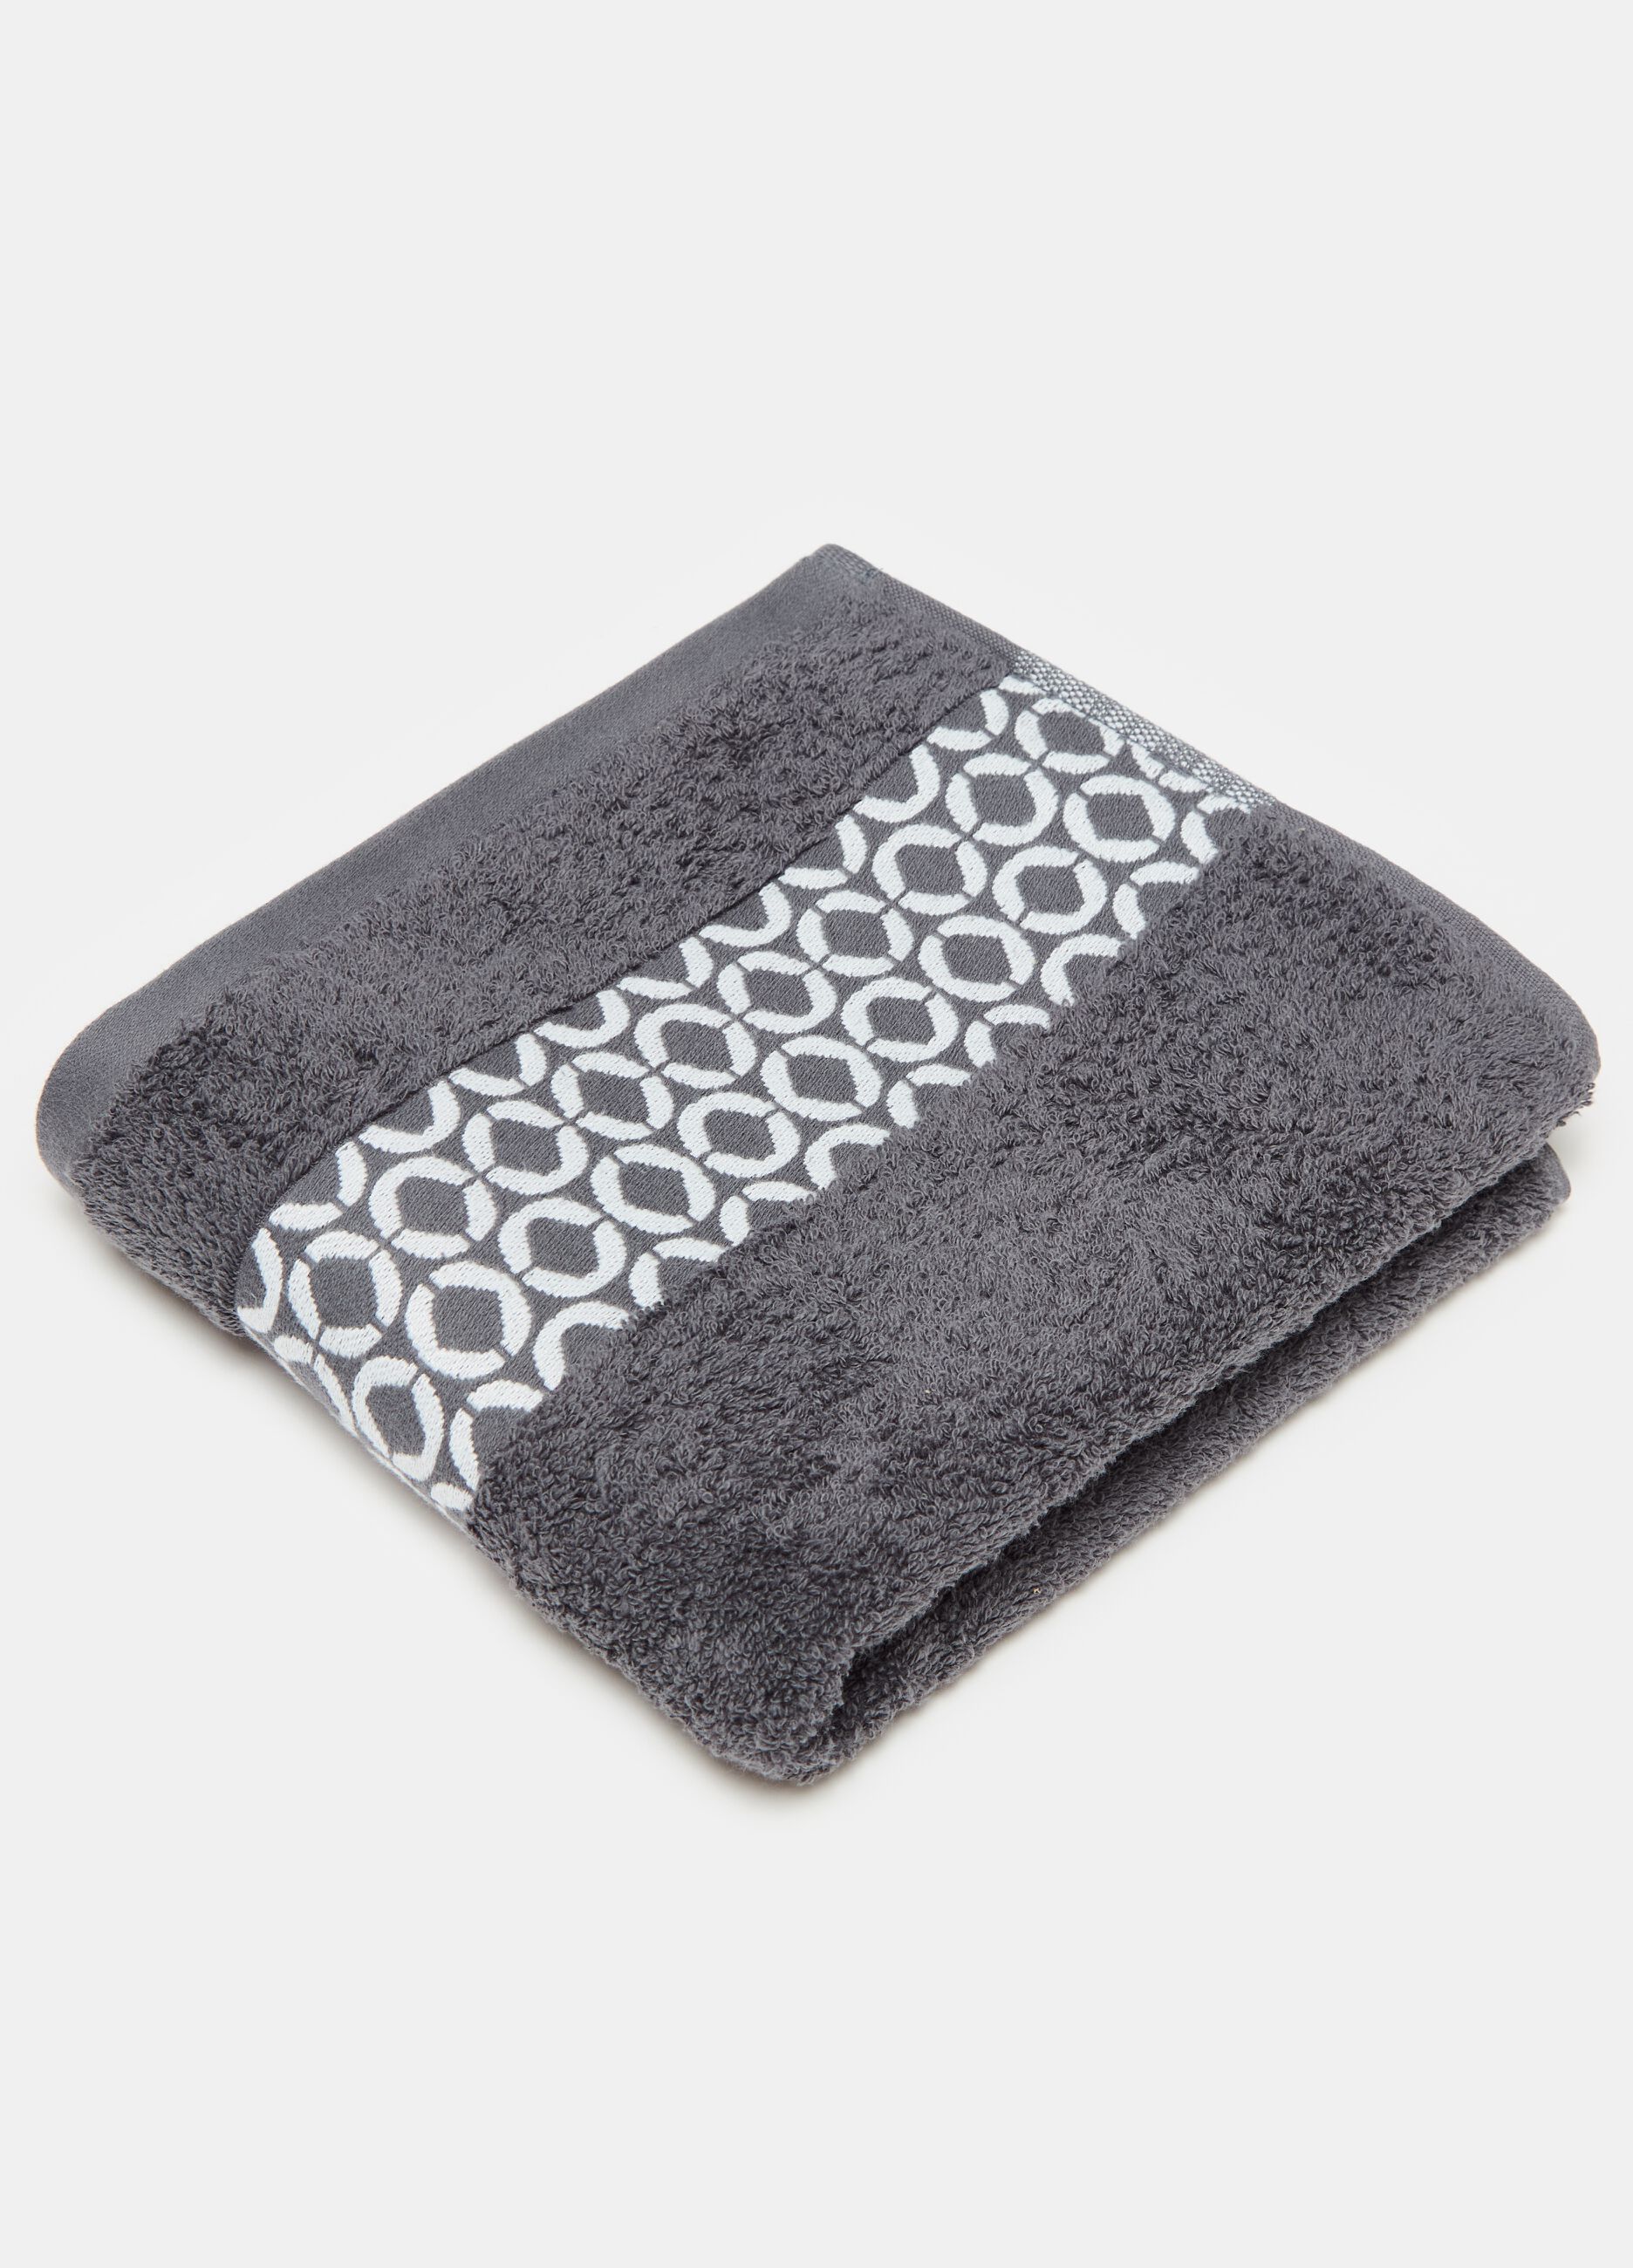 Face towel with dots patterned trim